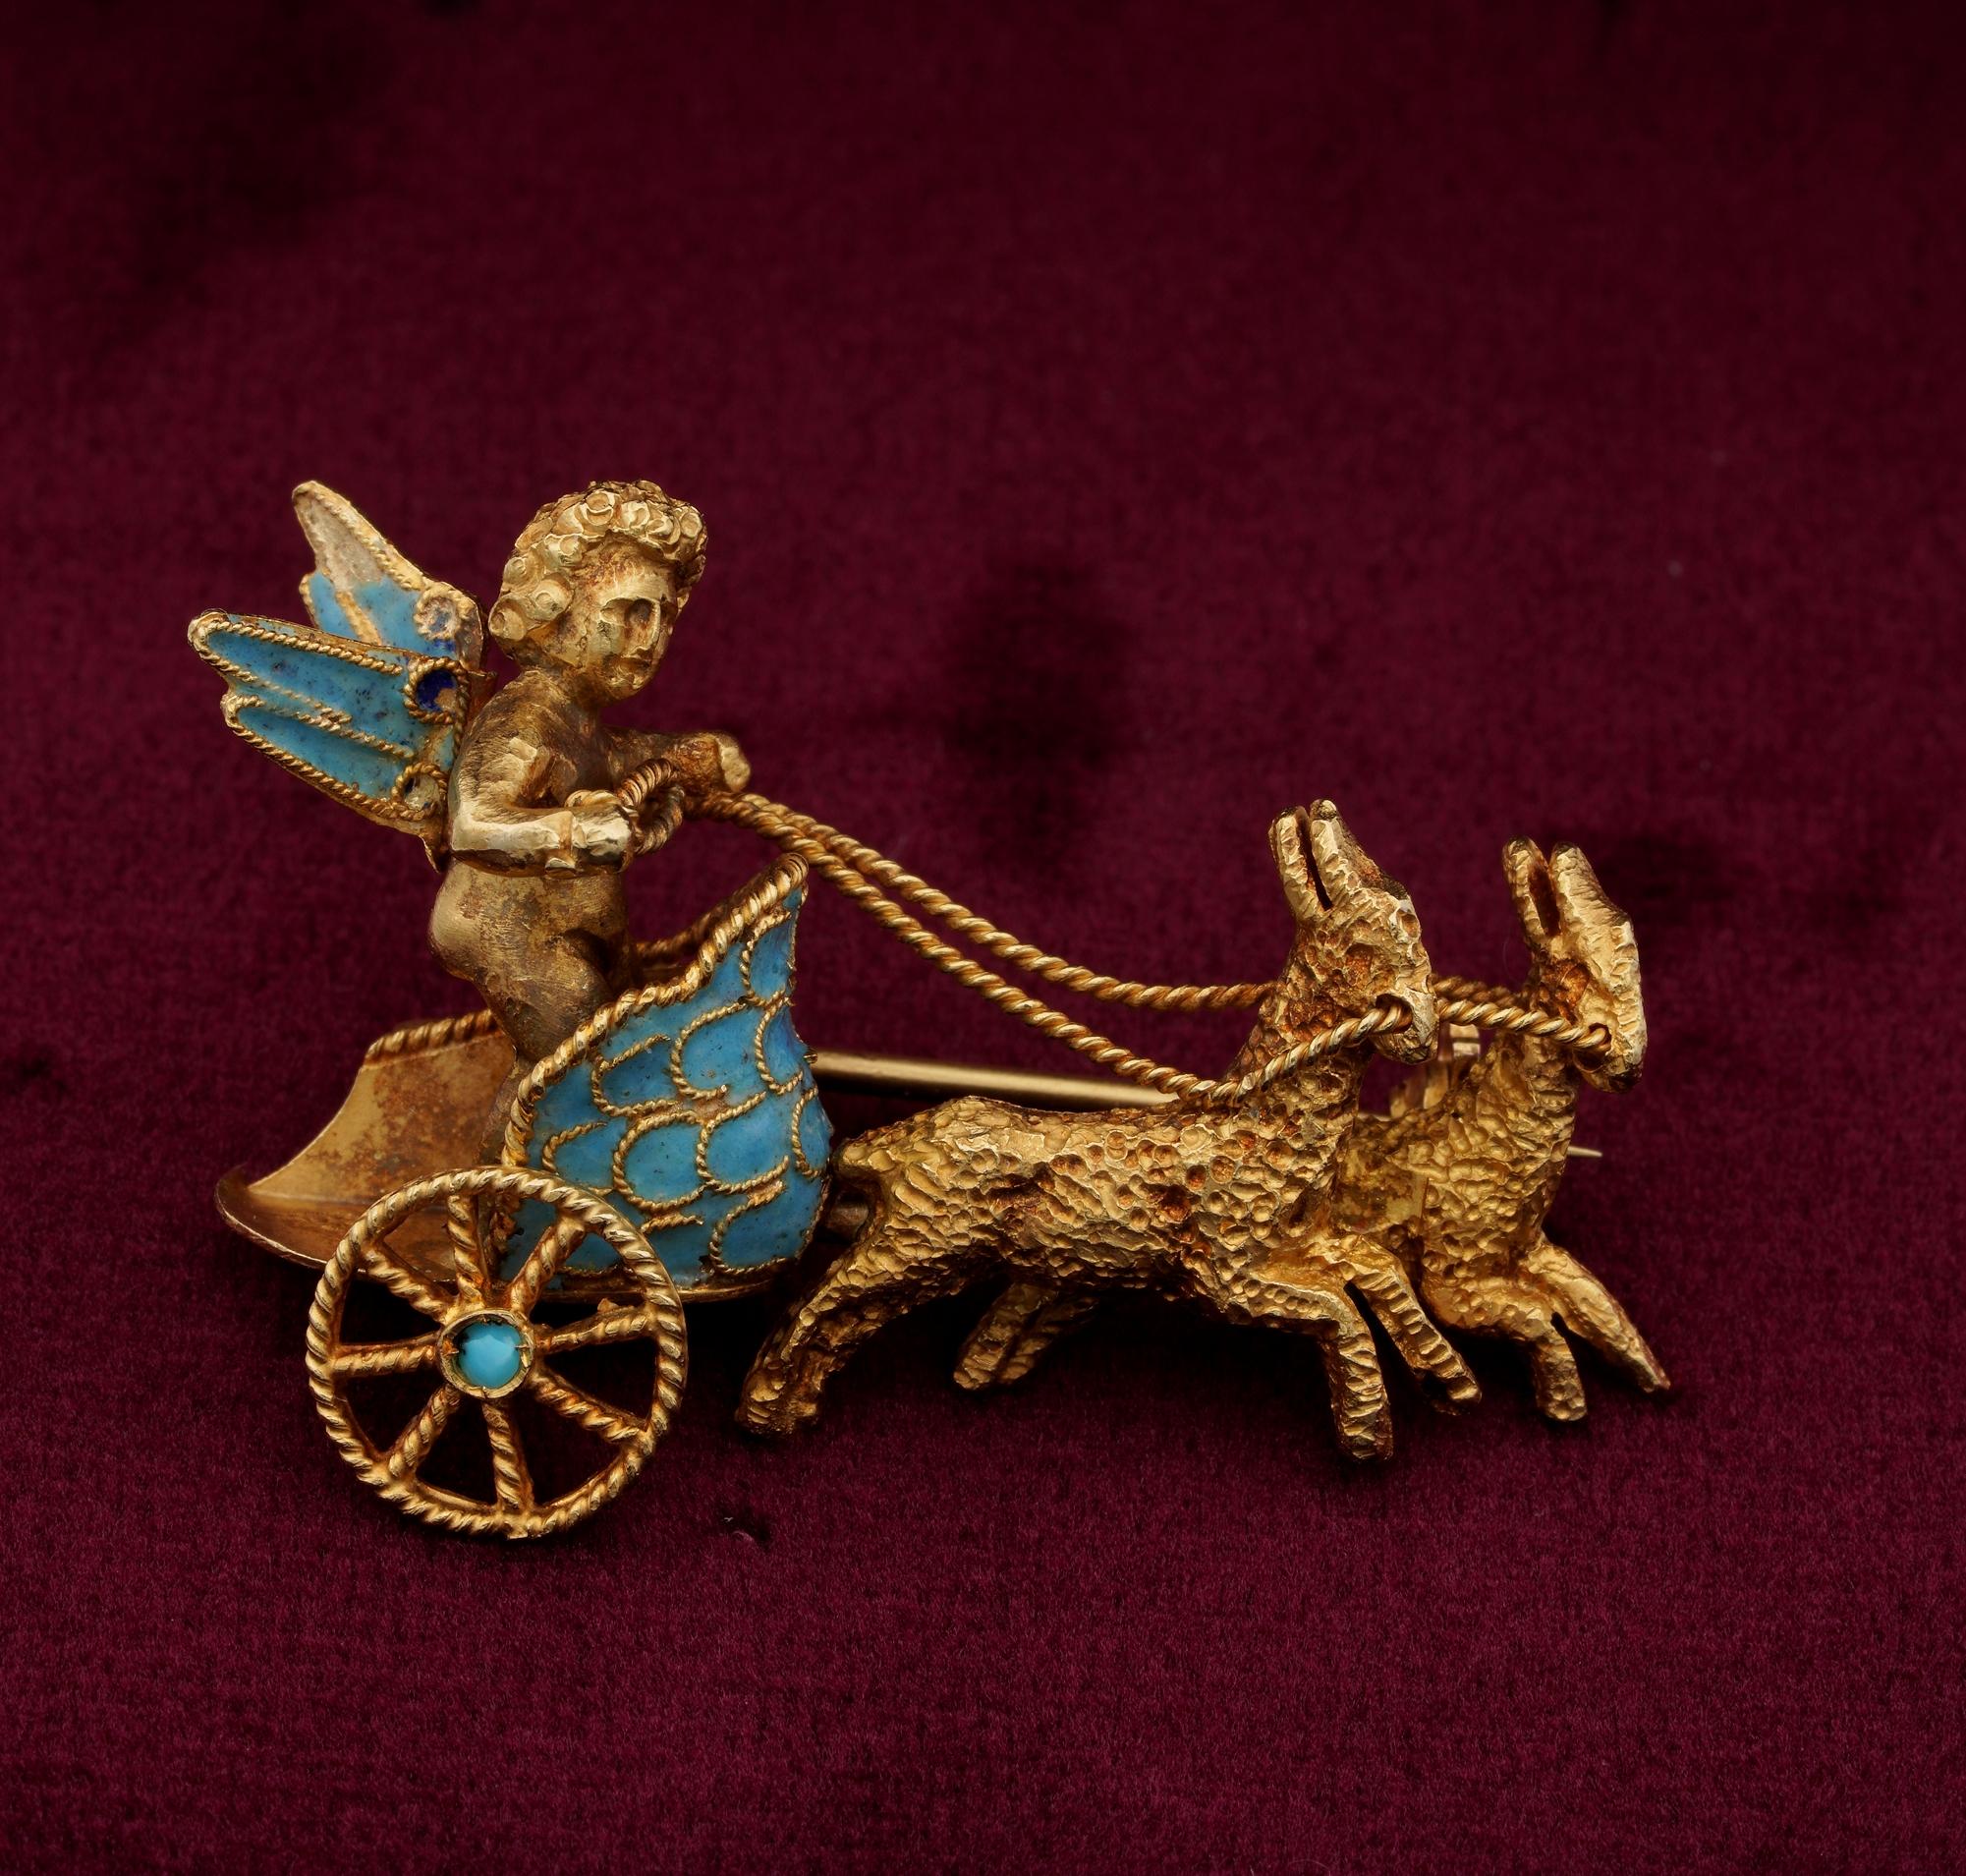 This lovely vintage solid 18 Kt gold hand created brooch is much of a little piece of art made by past Italian masters
The brooch shows a standing winged Cherub or Putto in a chariot being pulled by goats, hunting for love?
The whole is finely